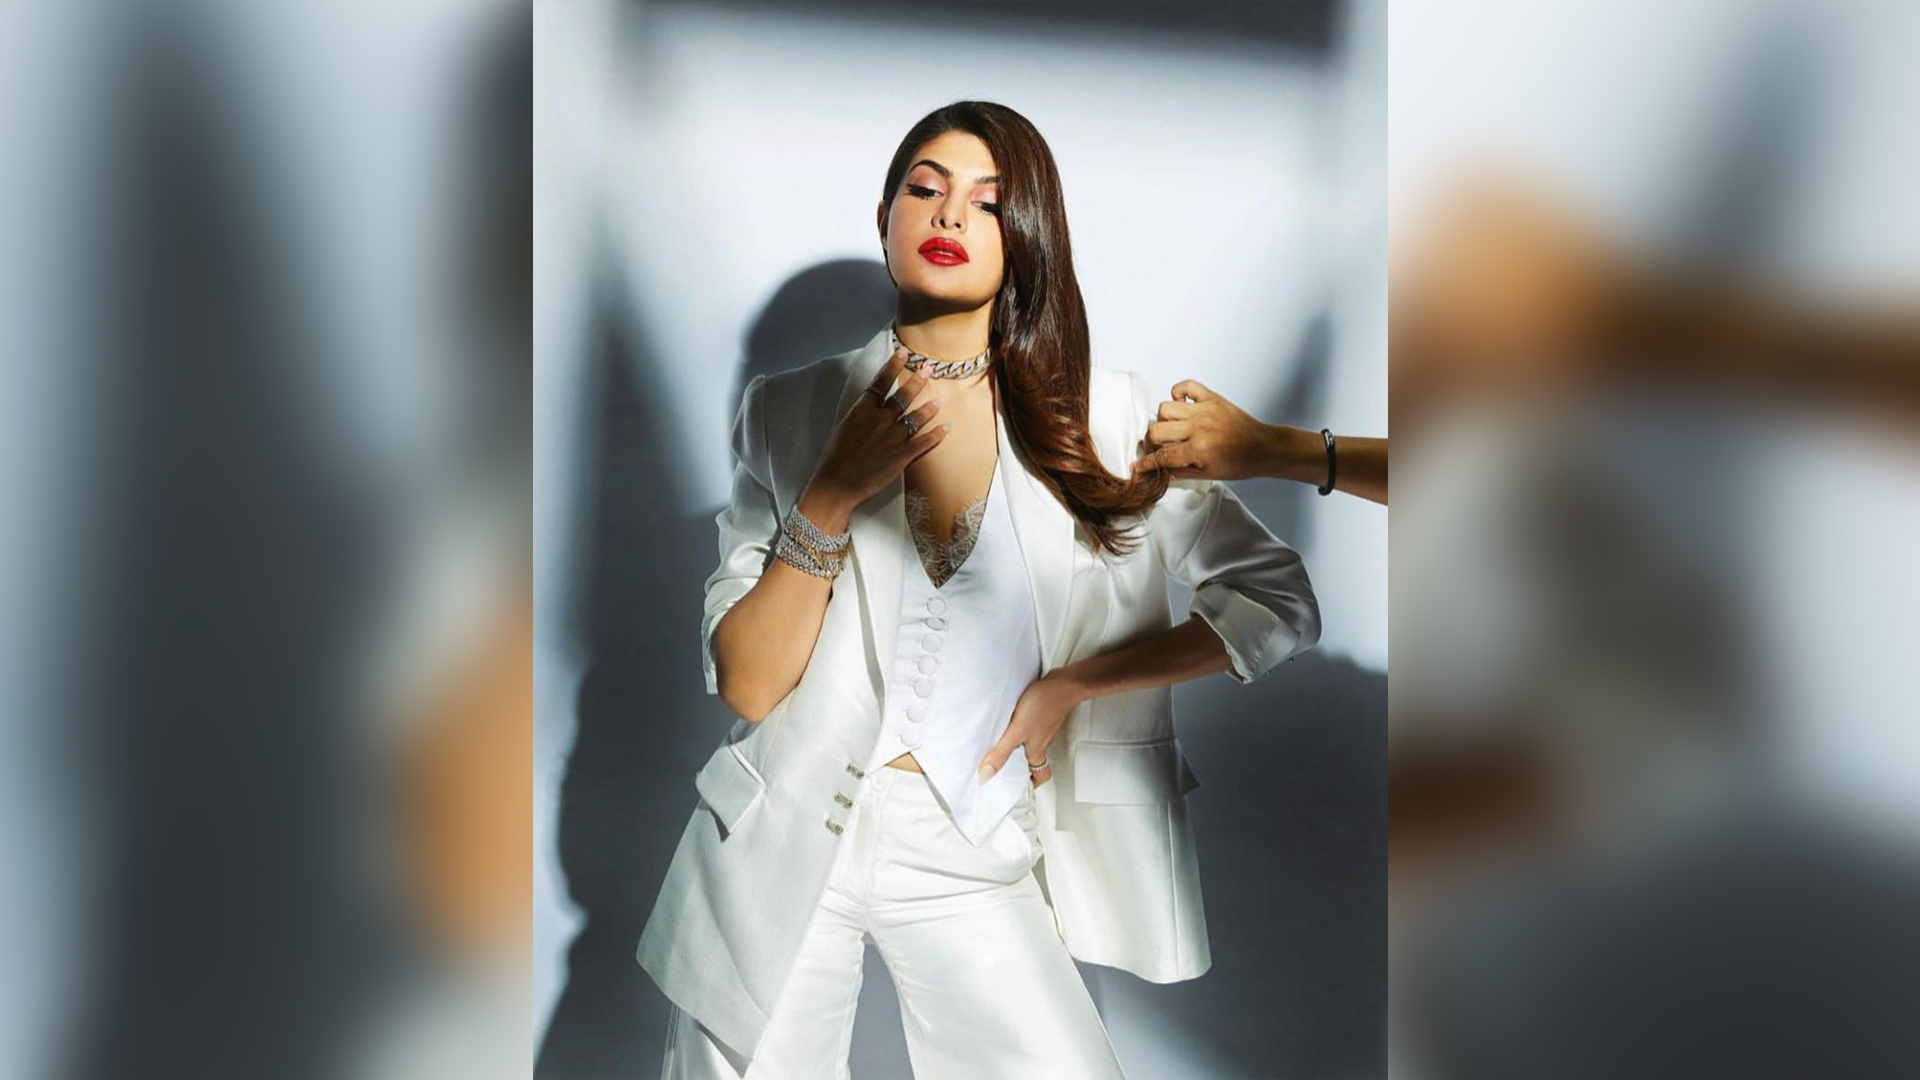 Giving fashion goals and how! Jacqueline Fernandez sporting a vest